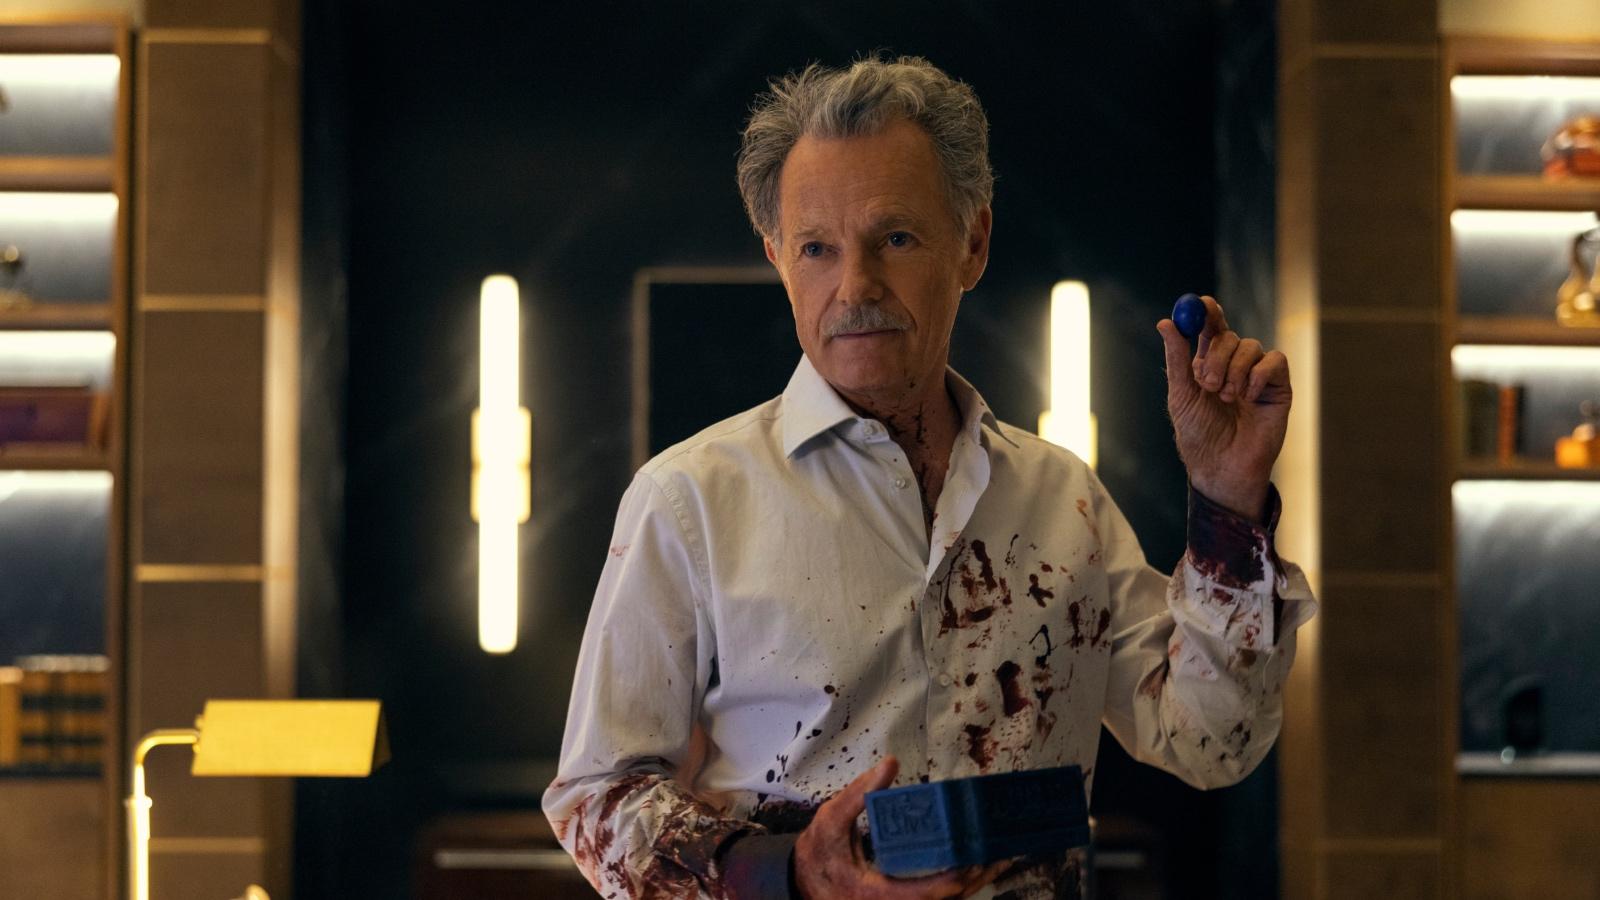 Bruce Greenwood in The Fall of the House of Usher as Roderick Usher